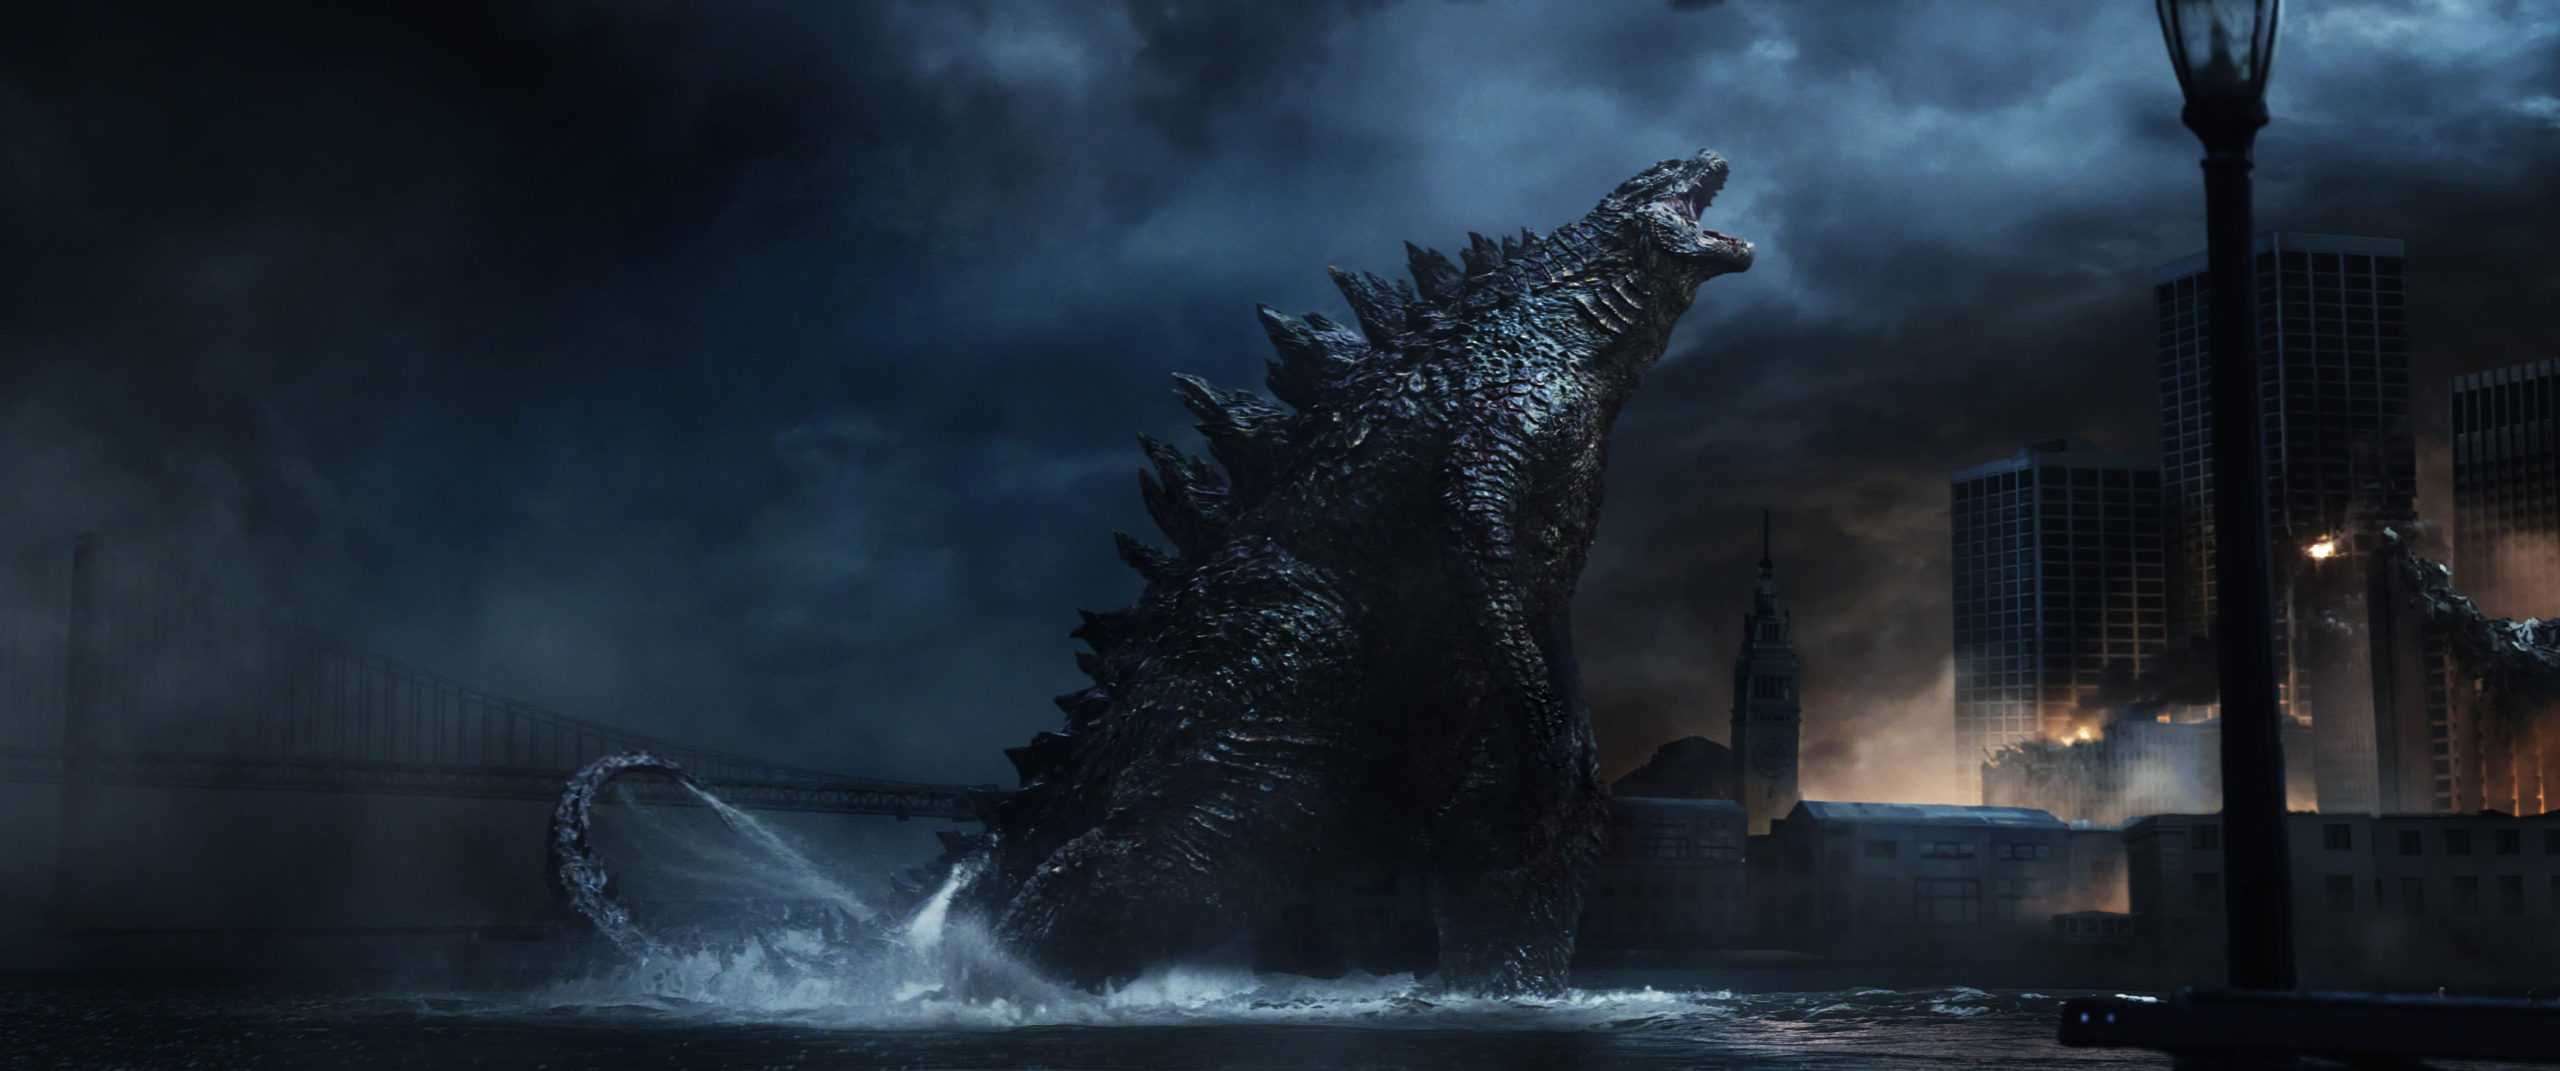 Godzilla standing in water and roaring towards the city.